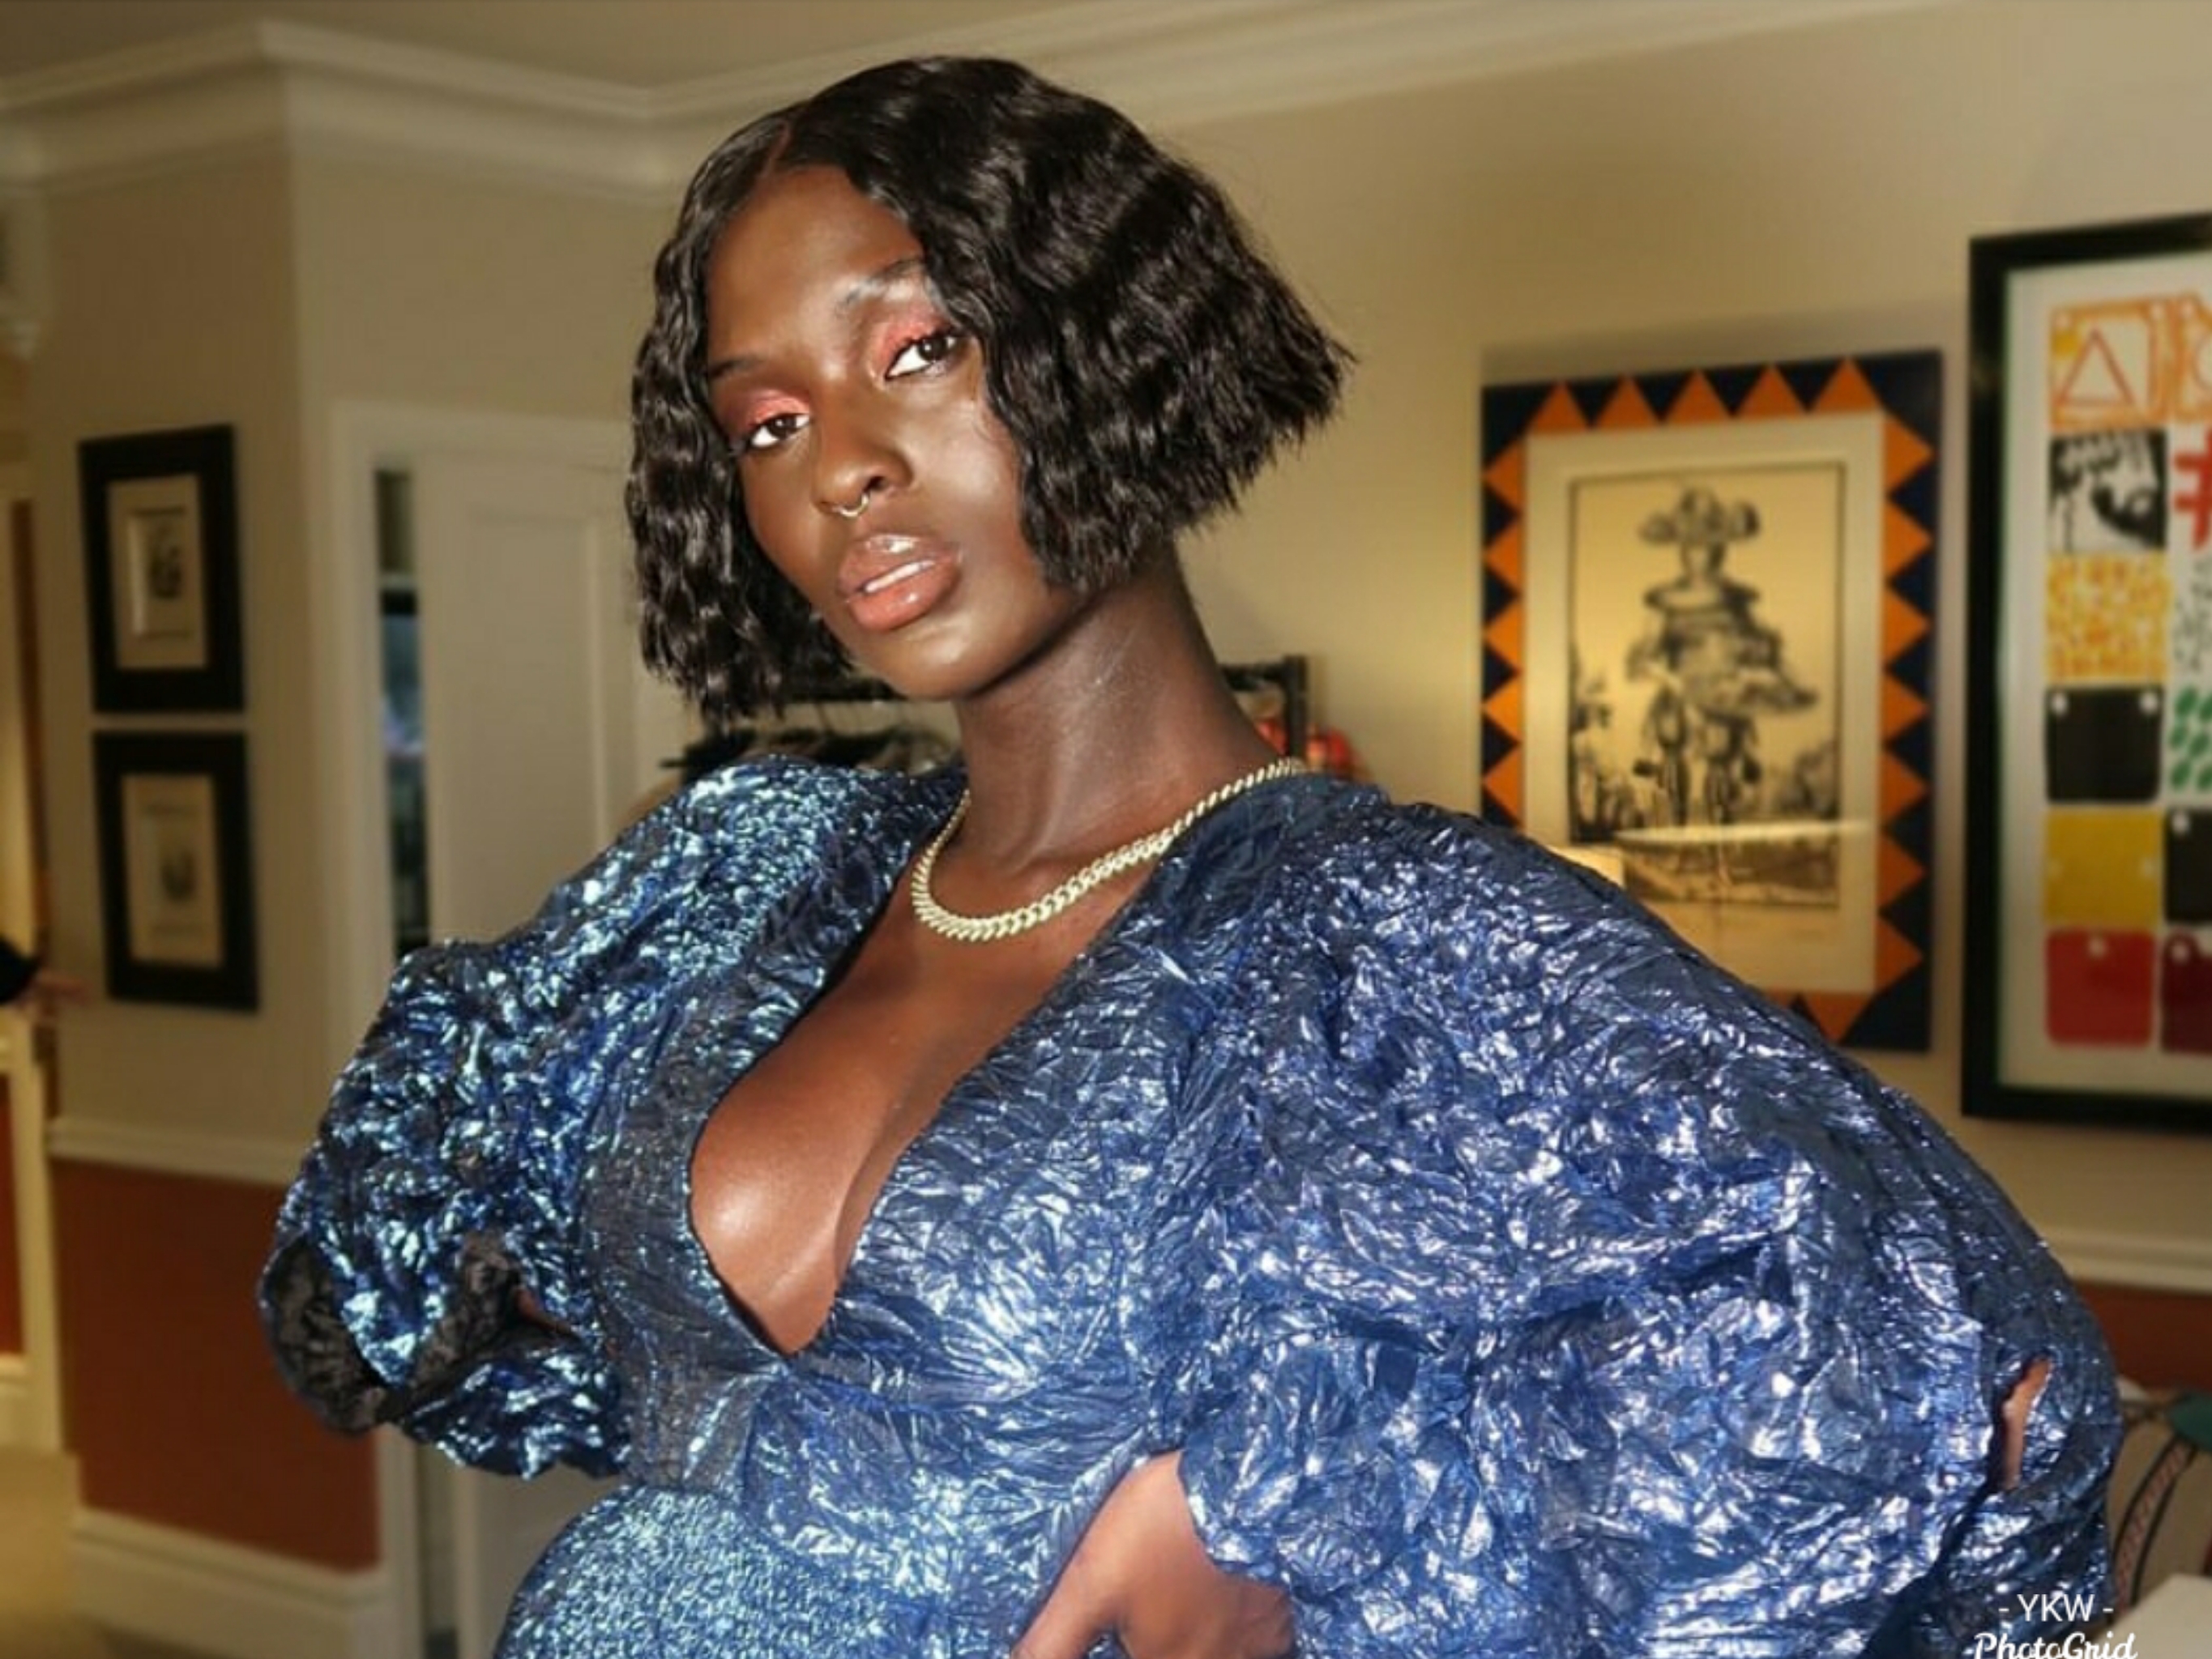 Queen & Slim Actress Jodie Turner-Smith Gives Birth To Baby Girl